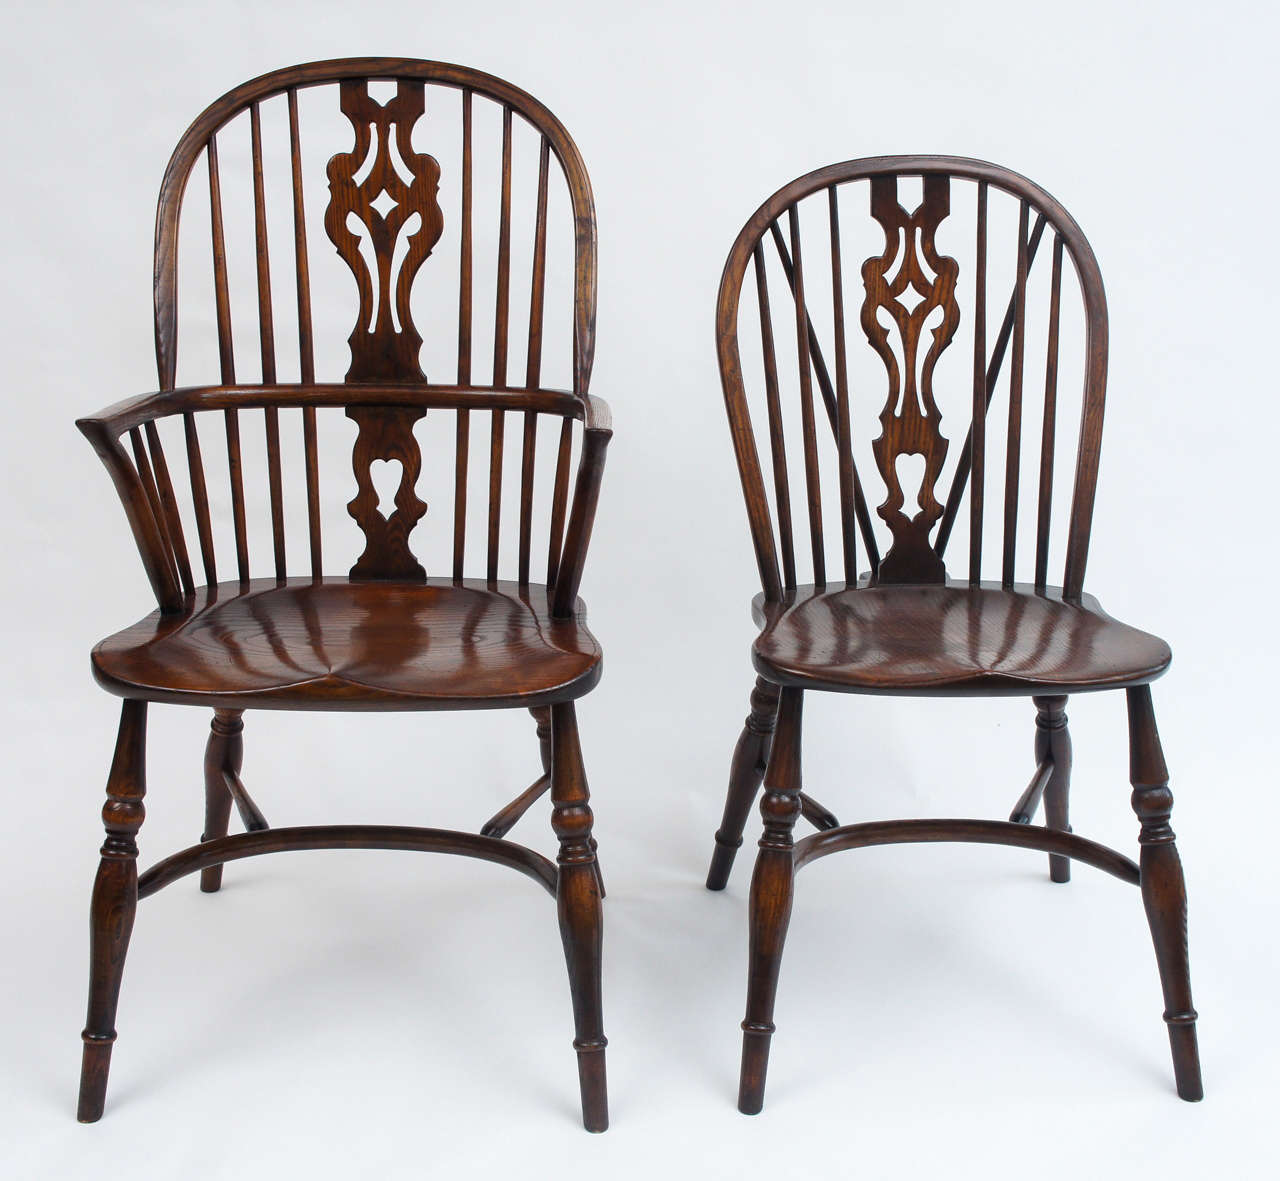 Stunning grain on this set of early 20thC English oak Windsor dining chairs. The design of the set was based on earlier sack back Windsors; design characteristics include saddled seats and curved stretchers. This exceptional set includes eight side